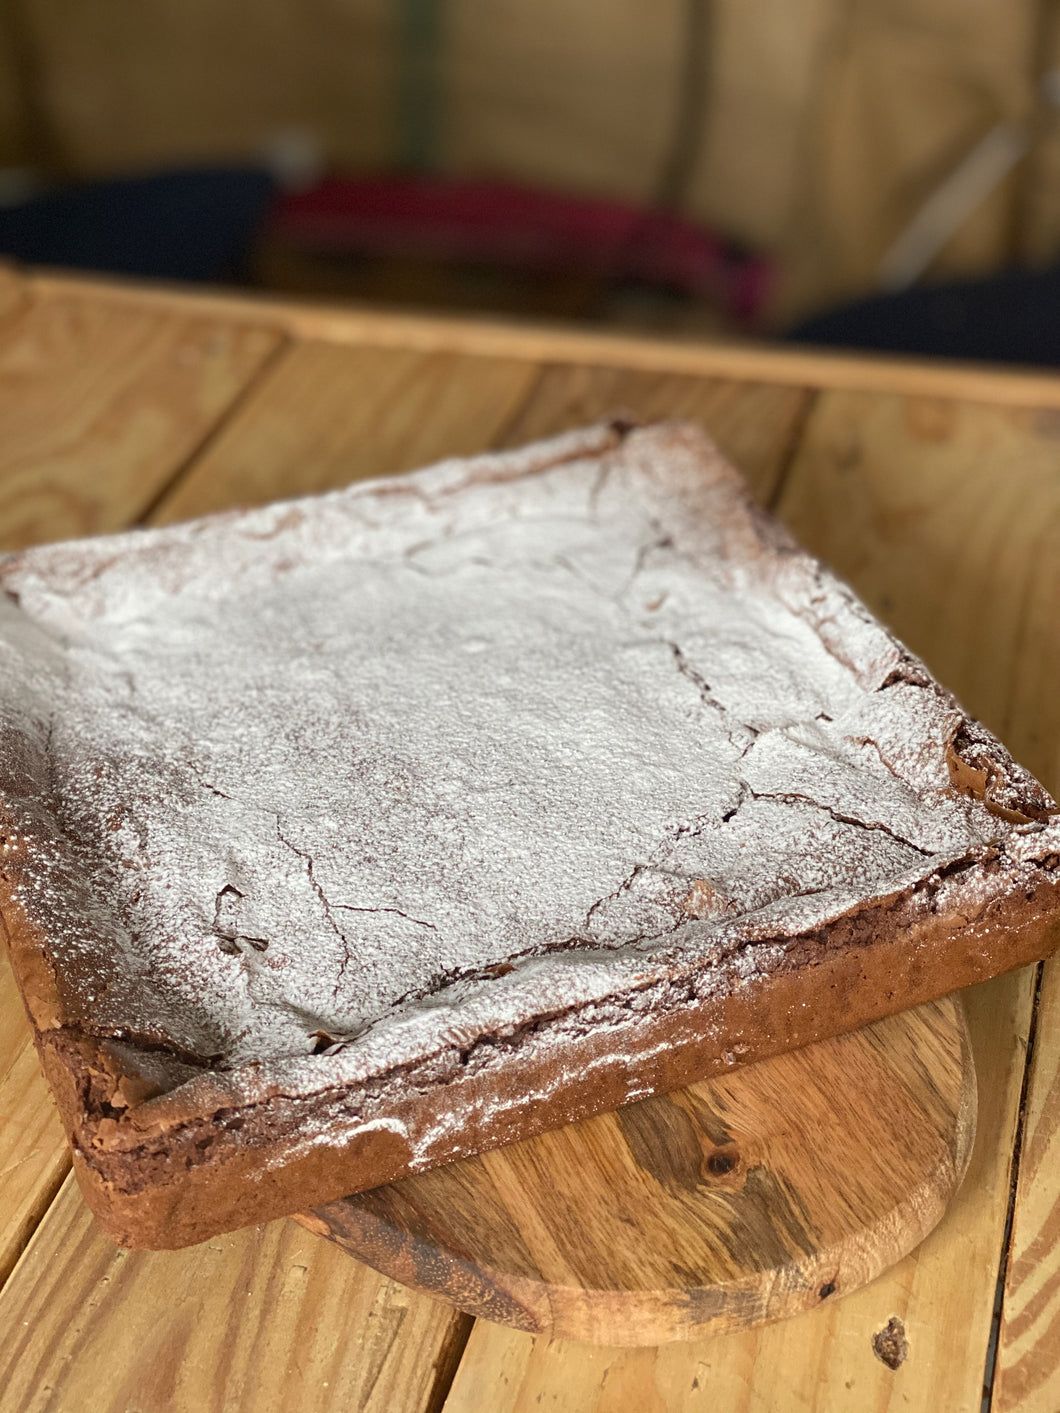 Whole Tray of Belgian Chocolate Brownie